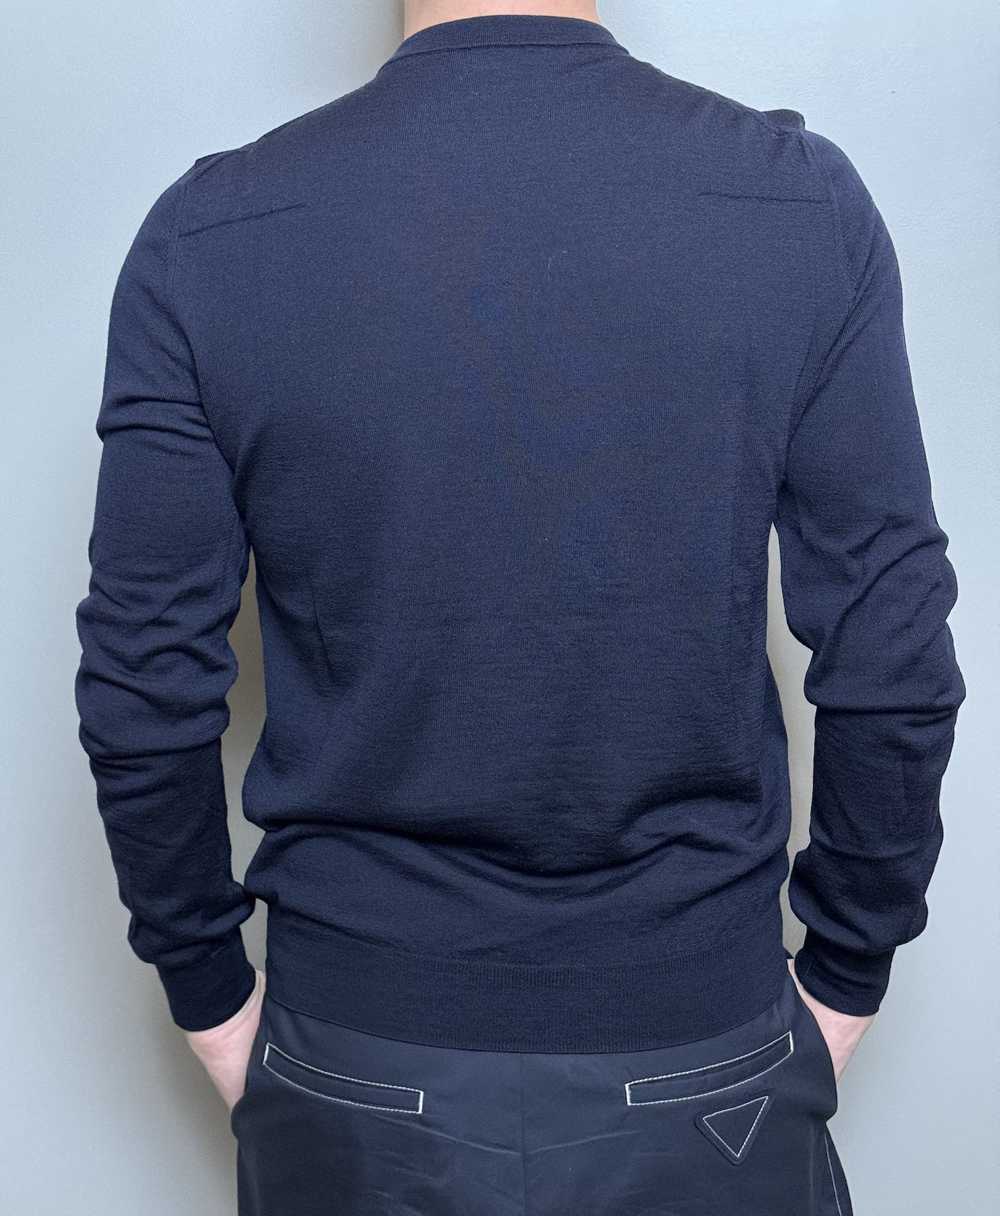 Dior Dior Homme Wool Knit Sweater, Navy - image 2